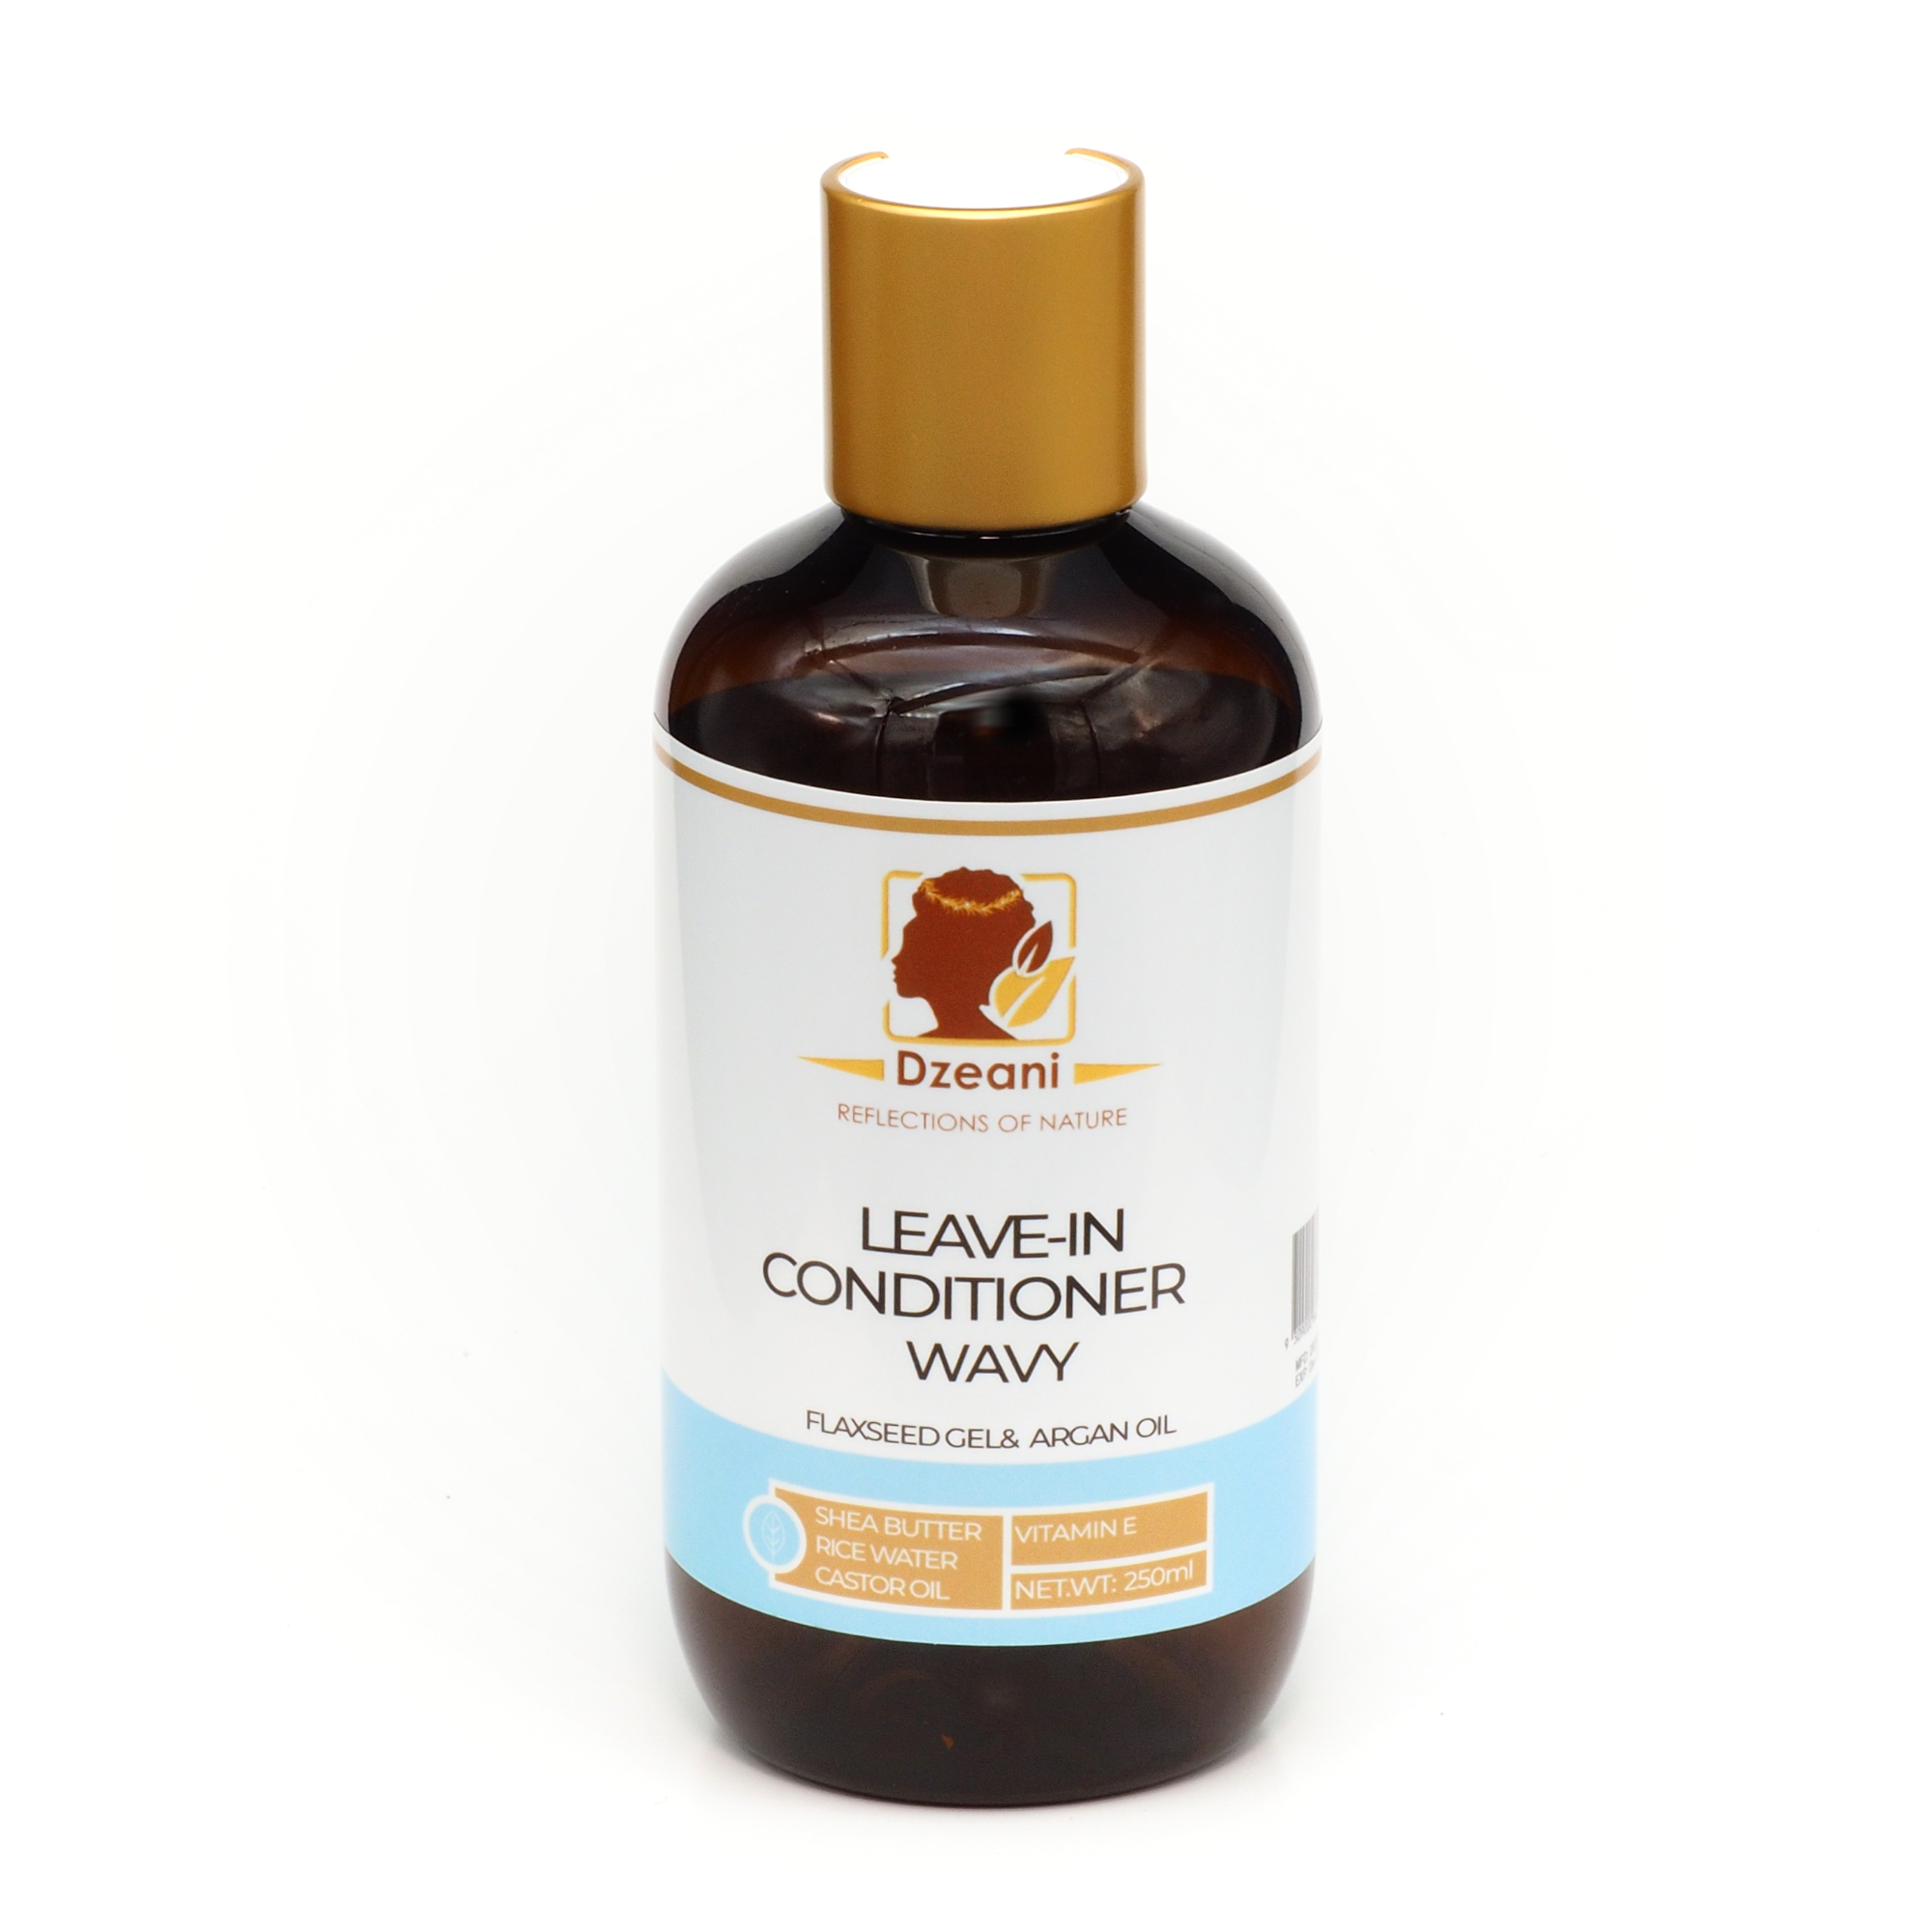 Our  Leave-In Wavy Conditioner is our lightest Leave-In conditioner- Dzeani 